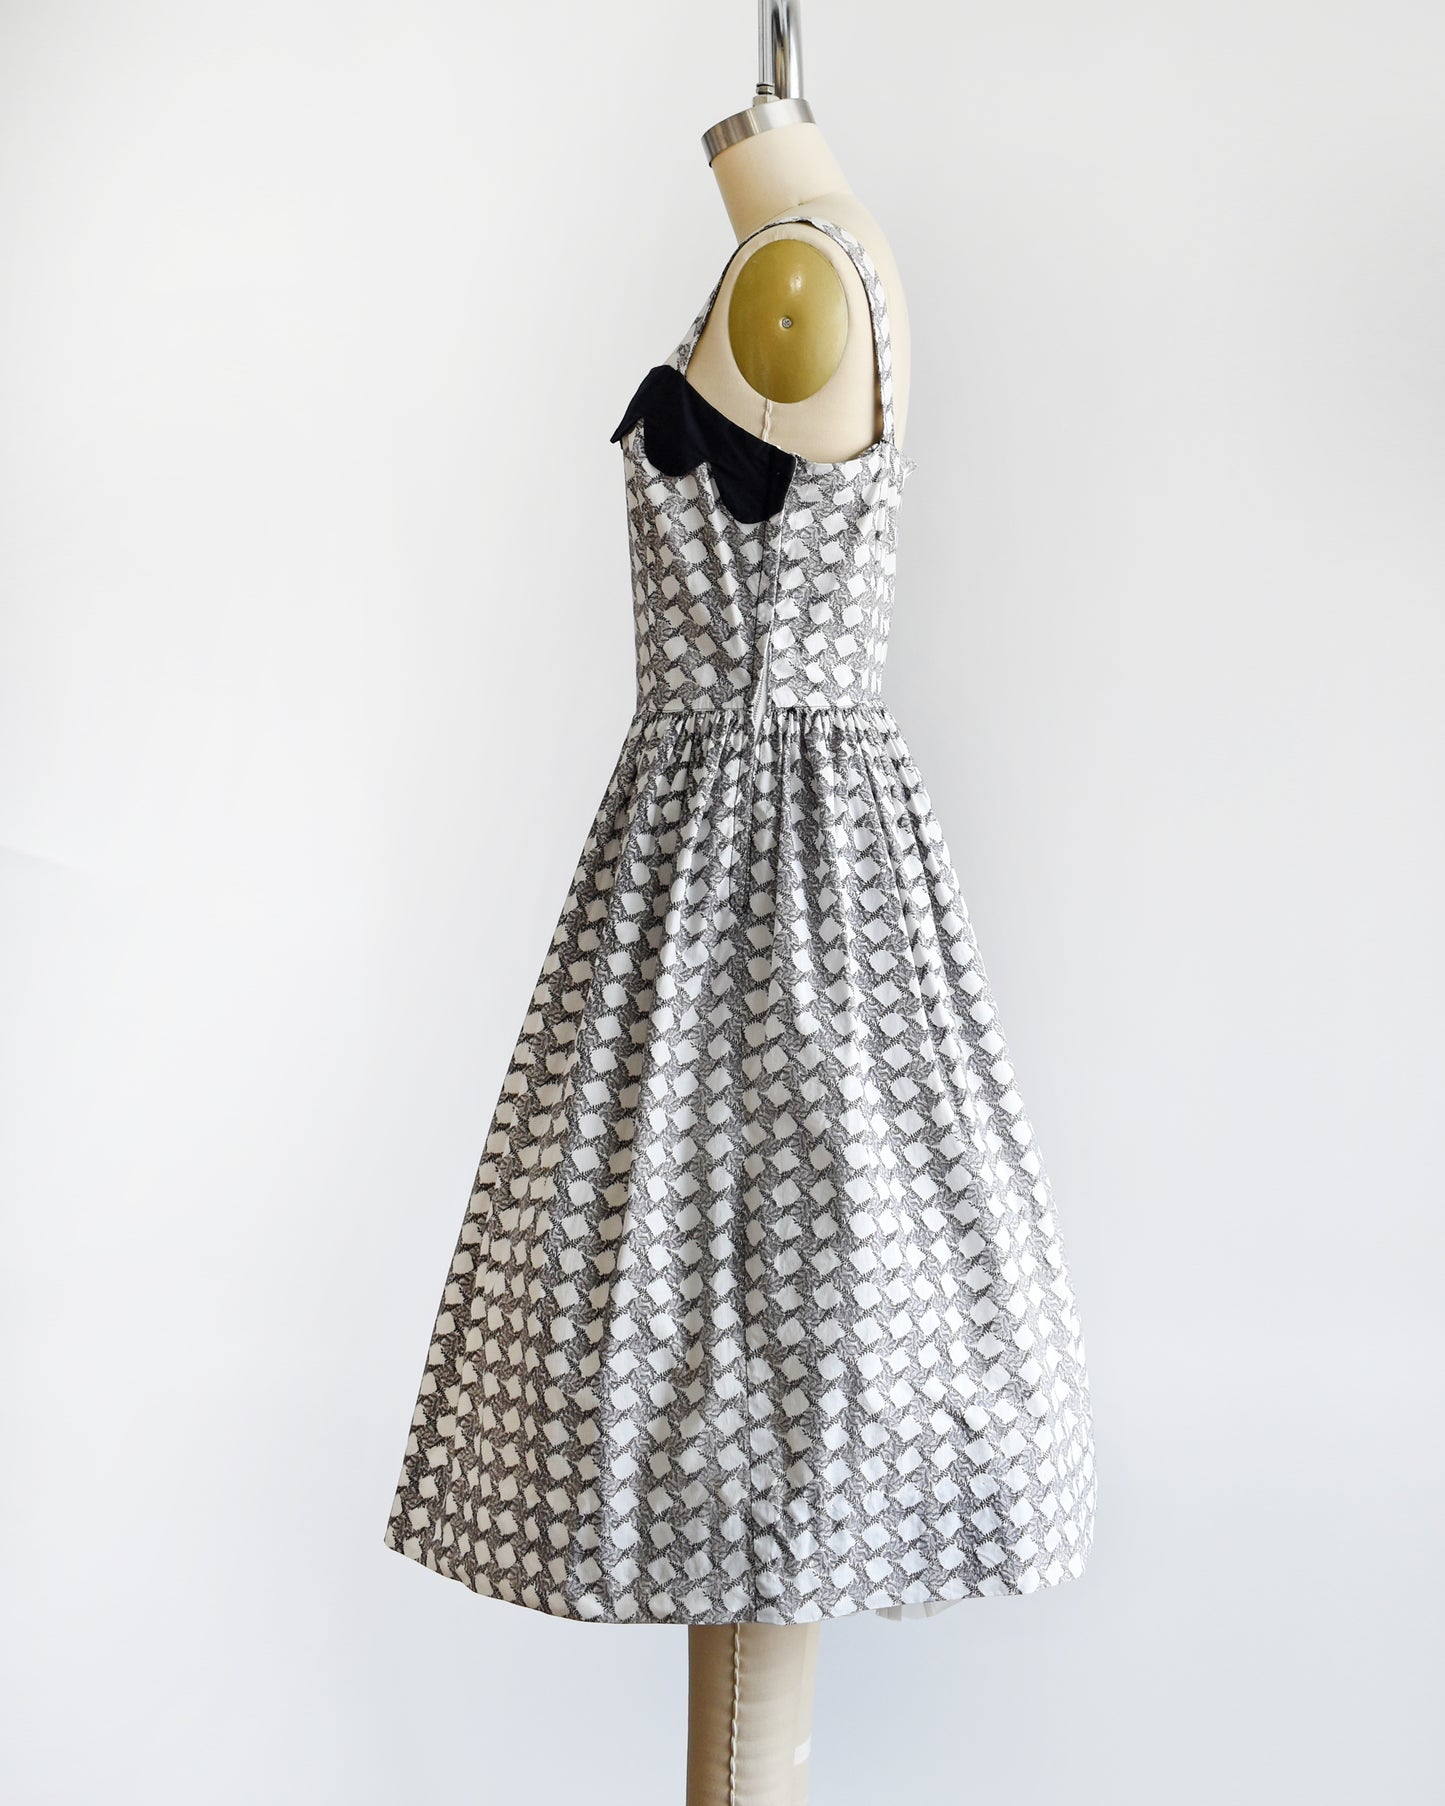 Side view of a vintage 1950s white dress with a  black fern motif that forms a diamond print. The dress has a black scalloped neckline and fit and flare skirt. A metal zipper is on the side.